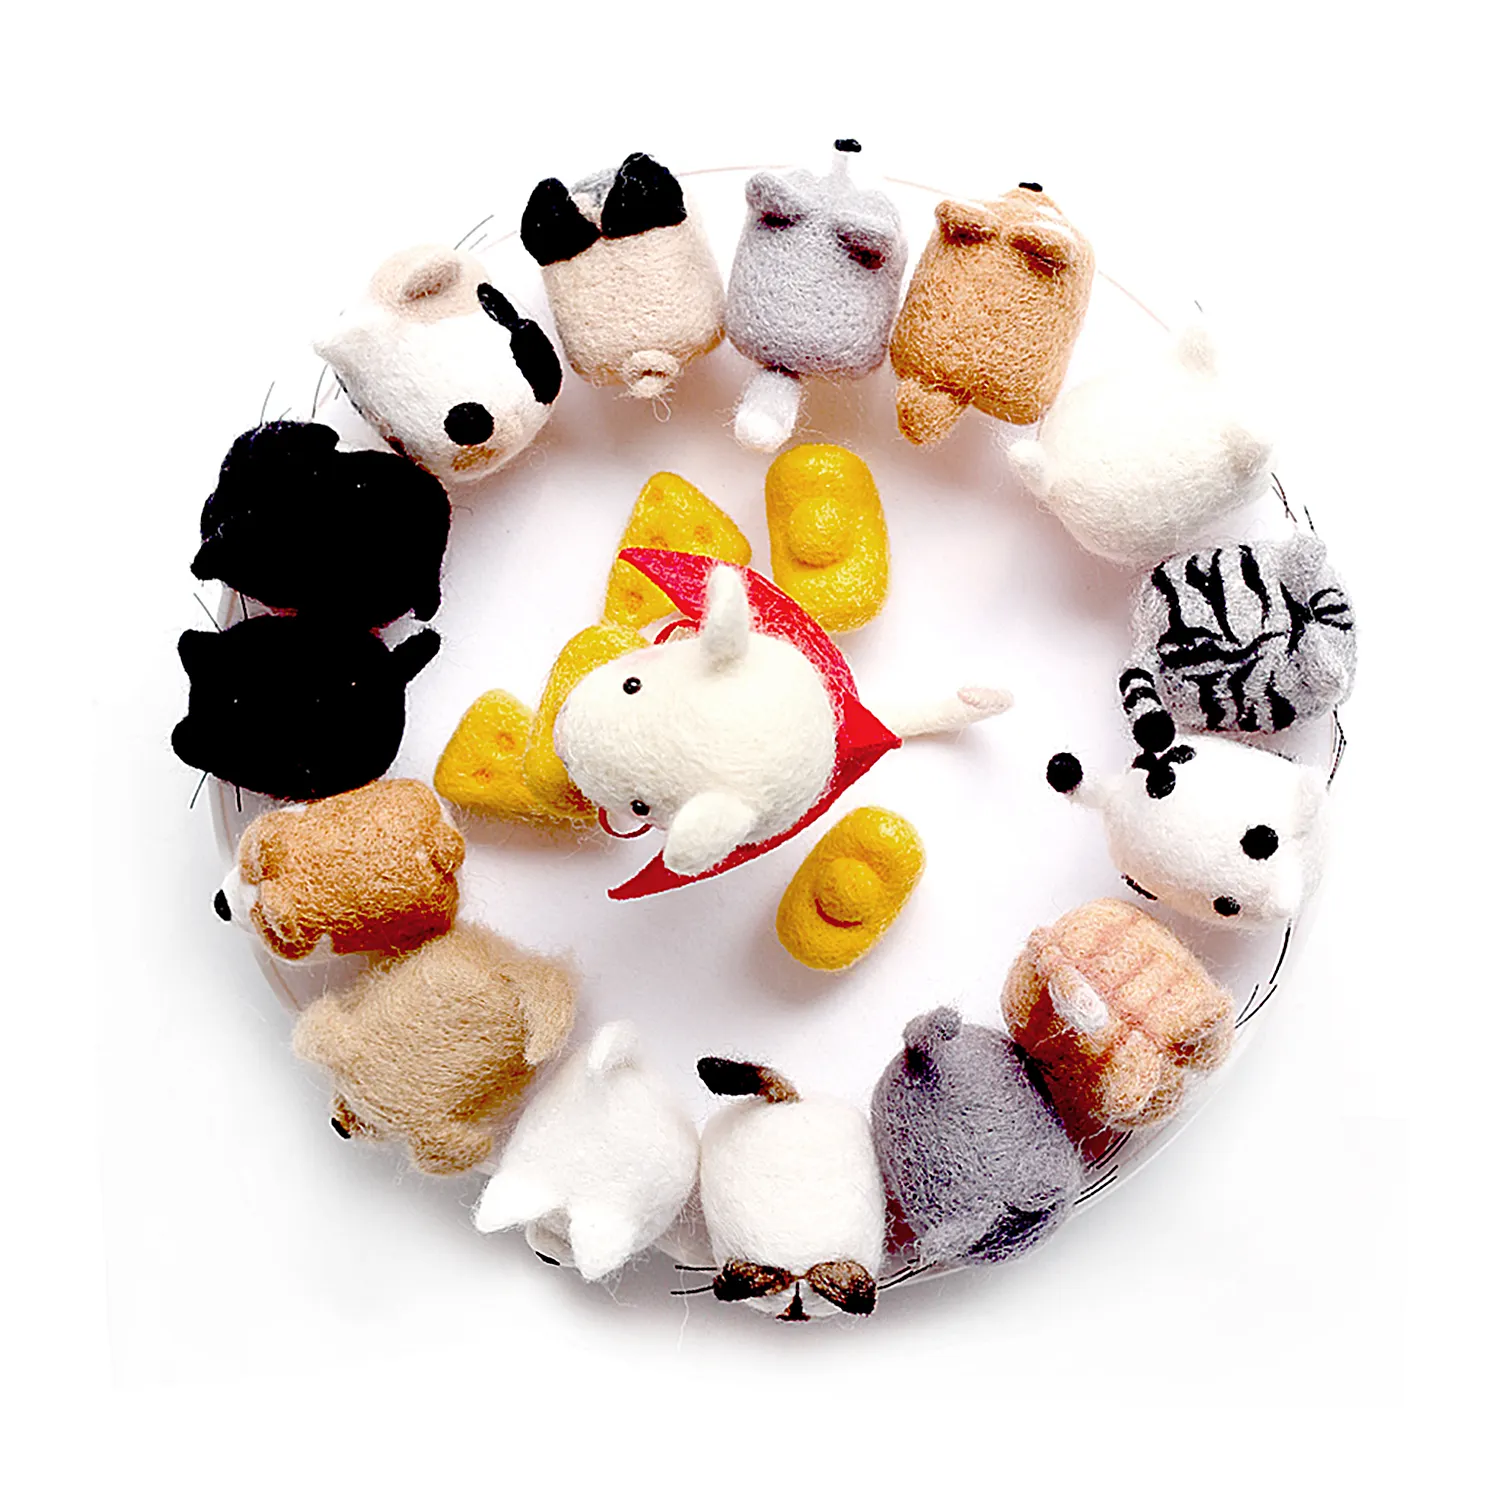 Custom Wool Felting DIY Kit Adorable Needle Felted Creations with Character and Personality from Manufacturing Factory